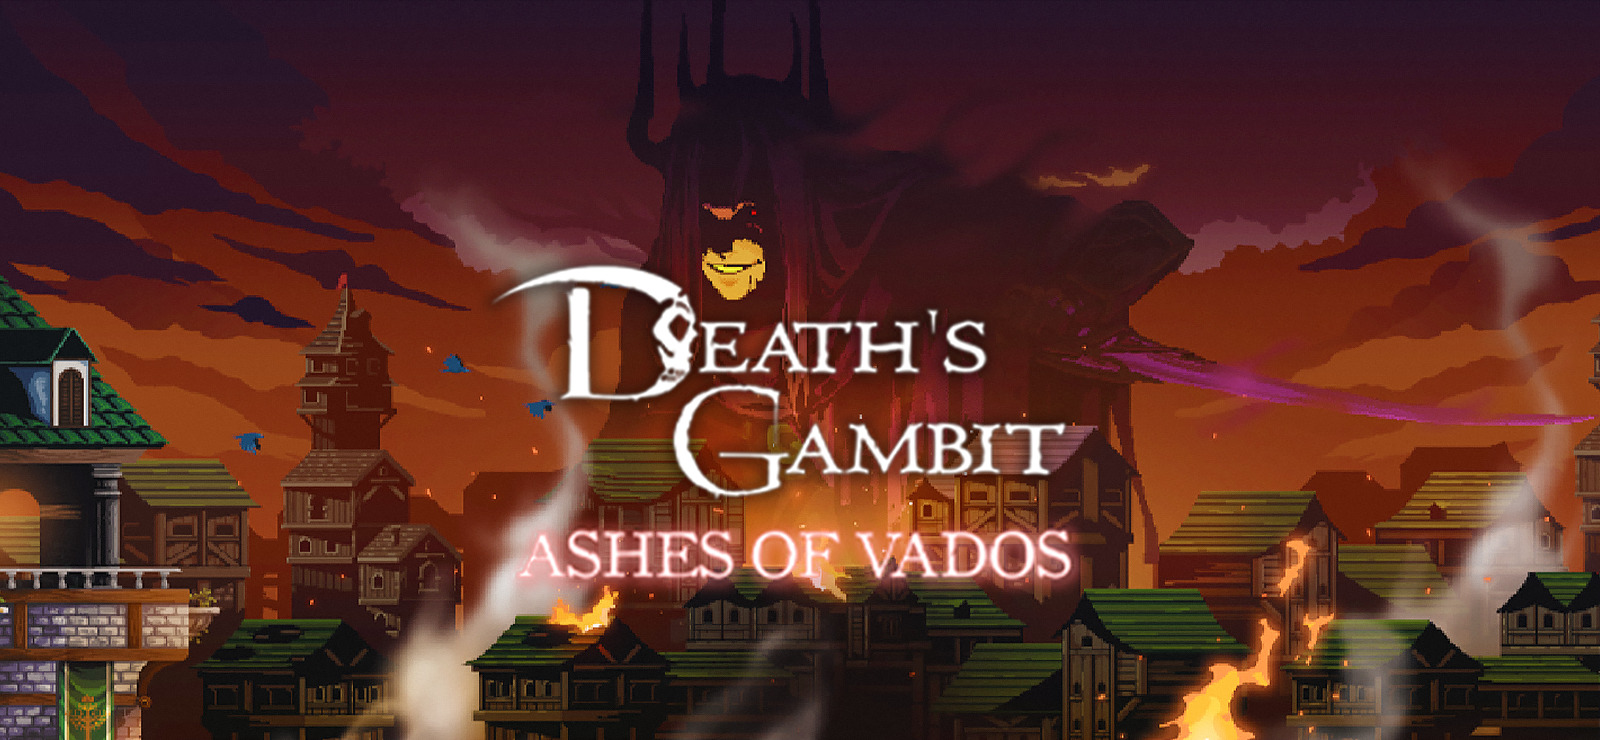 Death's Gambit: Ashes of Vados - Metacritic